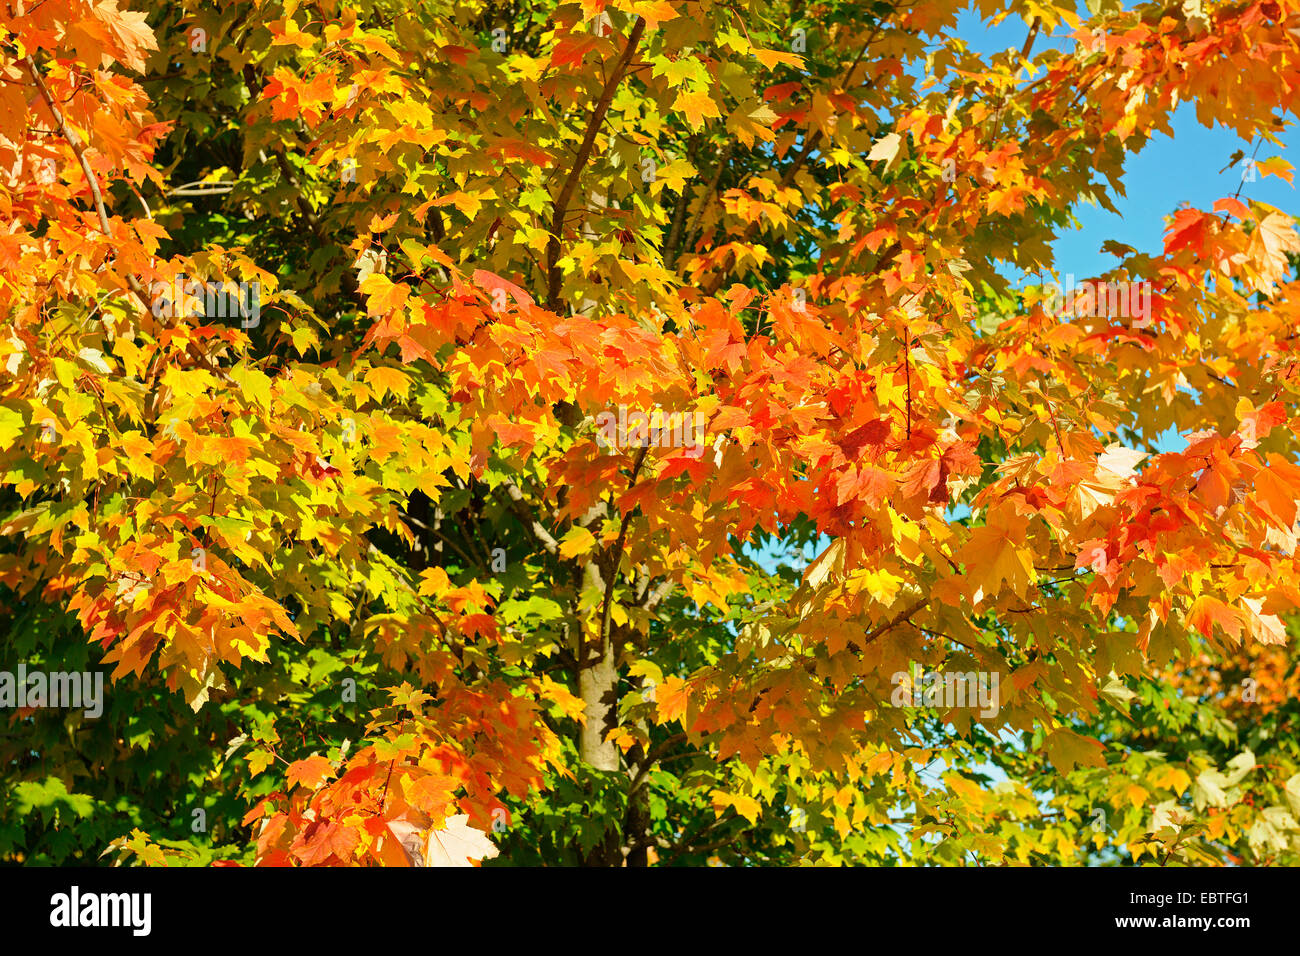 sycamore maple, great maple (Acer pseudoplatanus), autumn leaves, Germany Stock Photo